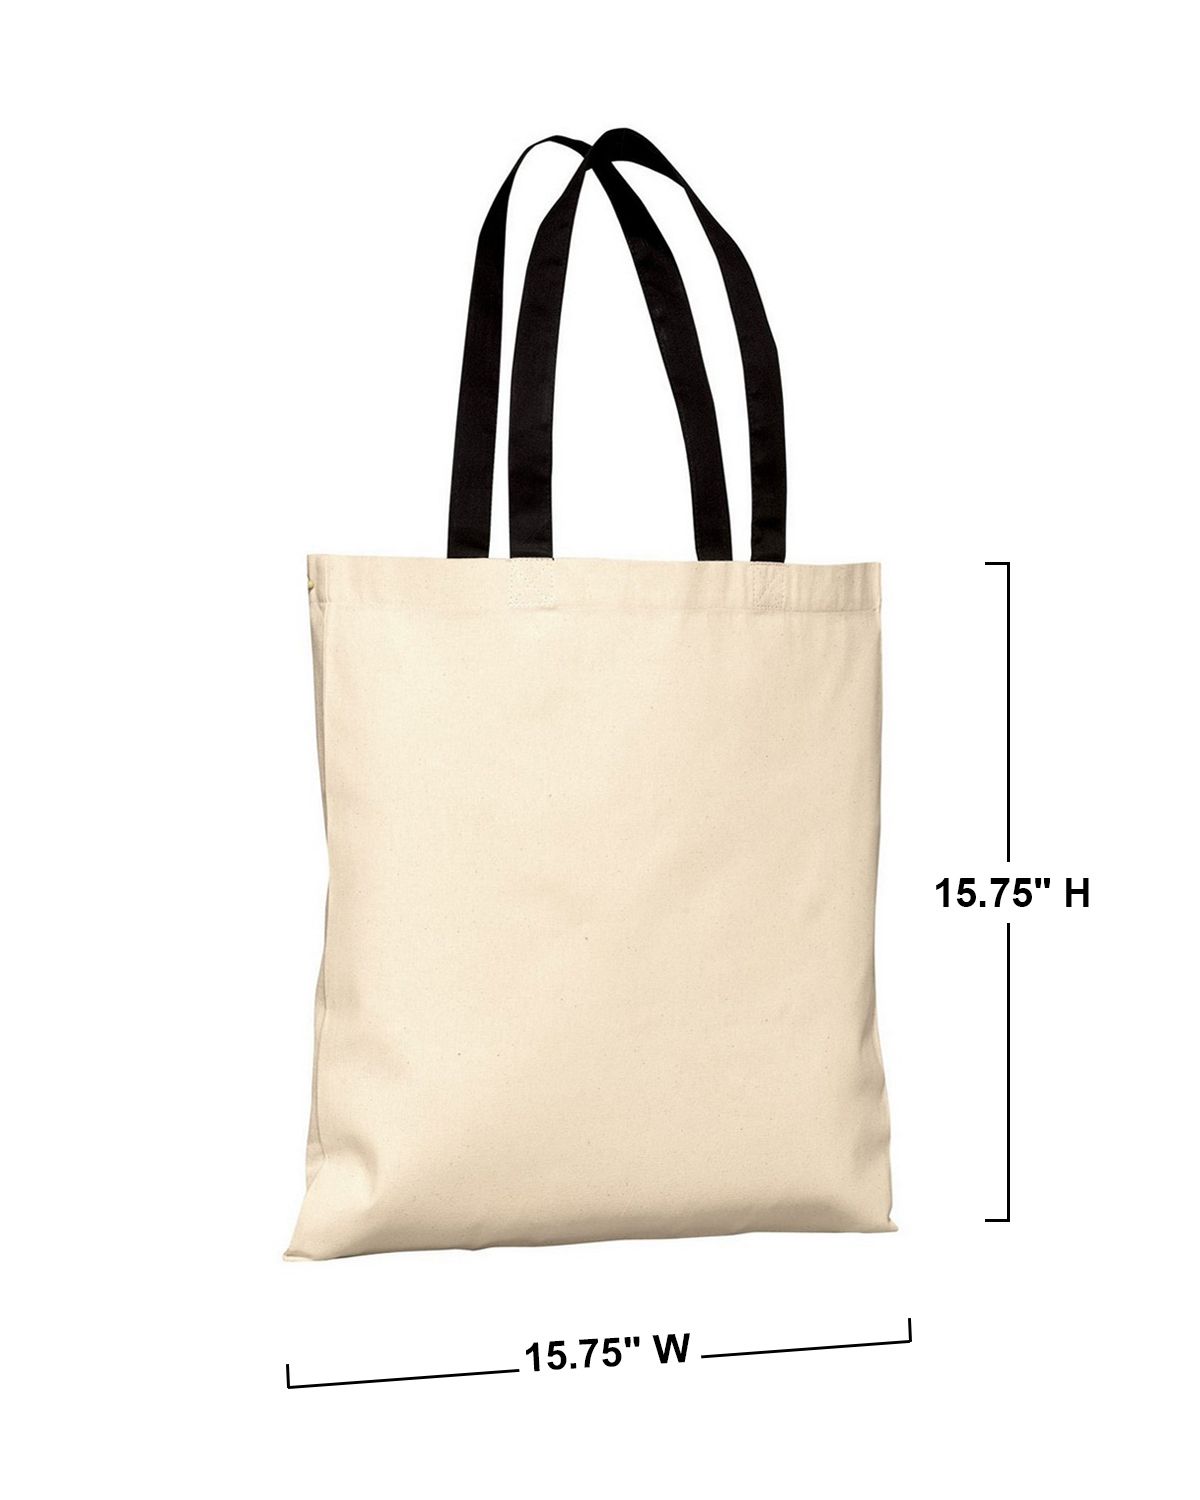 Port Authority B150 Cotton Sheeting Budget Tote